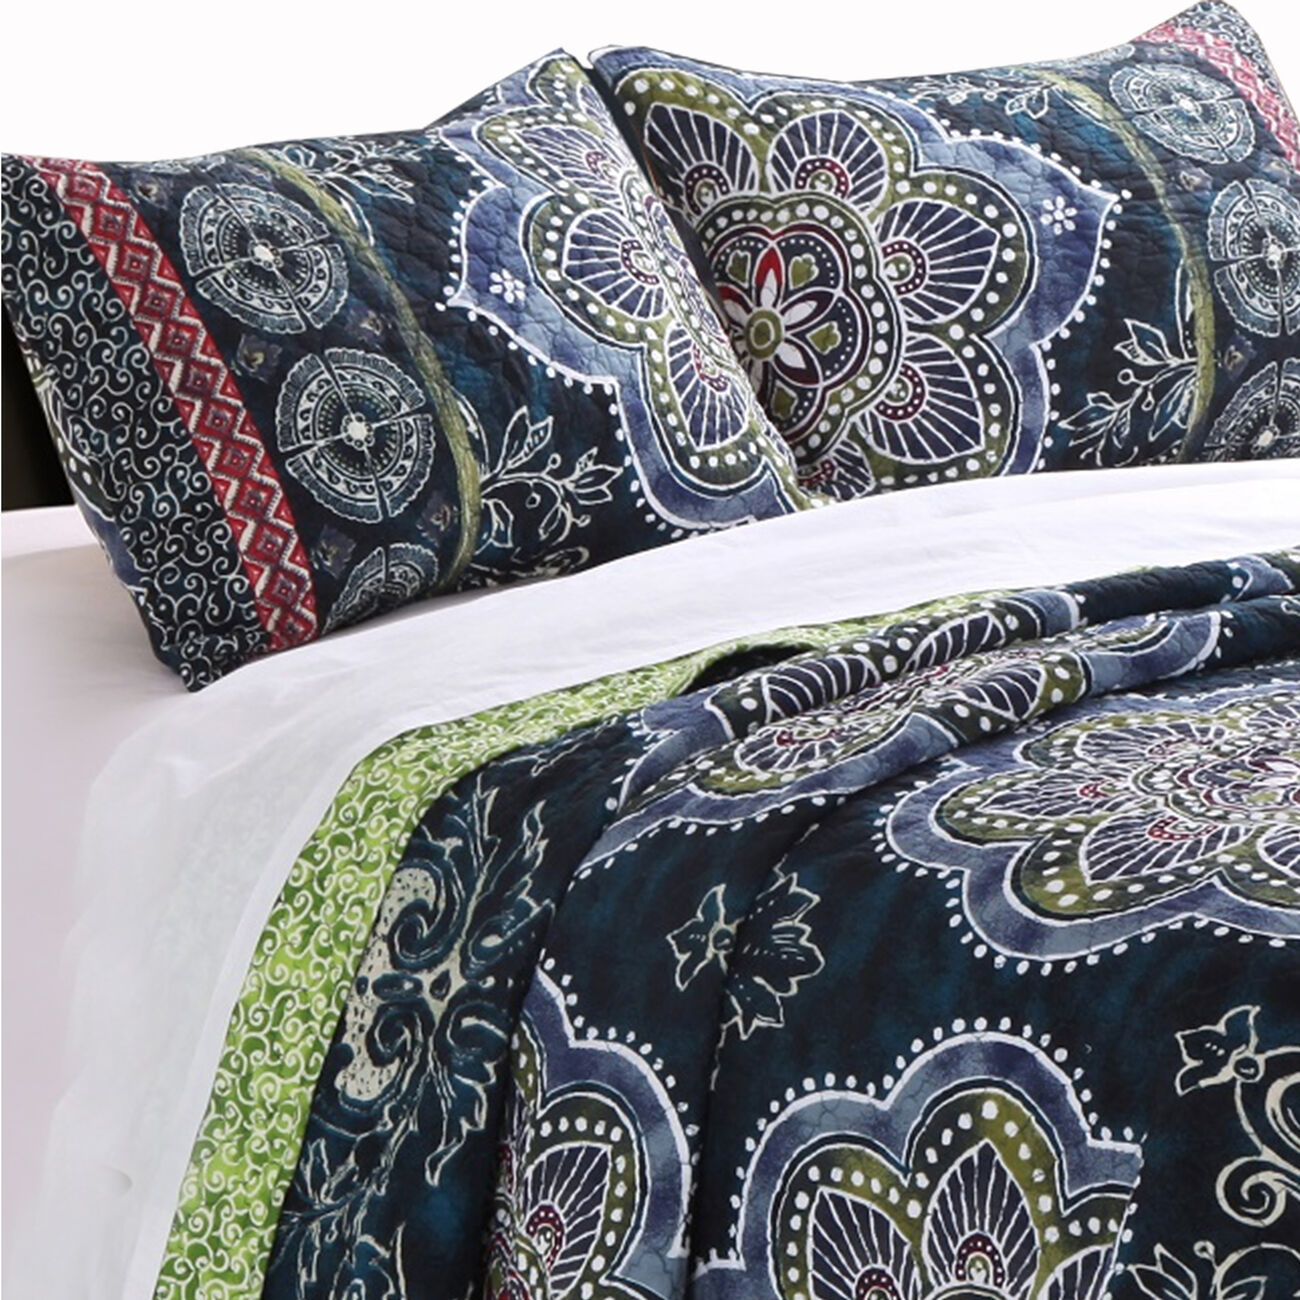 3 Piece Full Size Quilt Set with Medallion Print, Dark Blue and Green